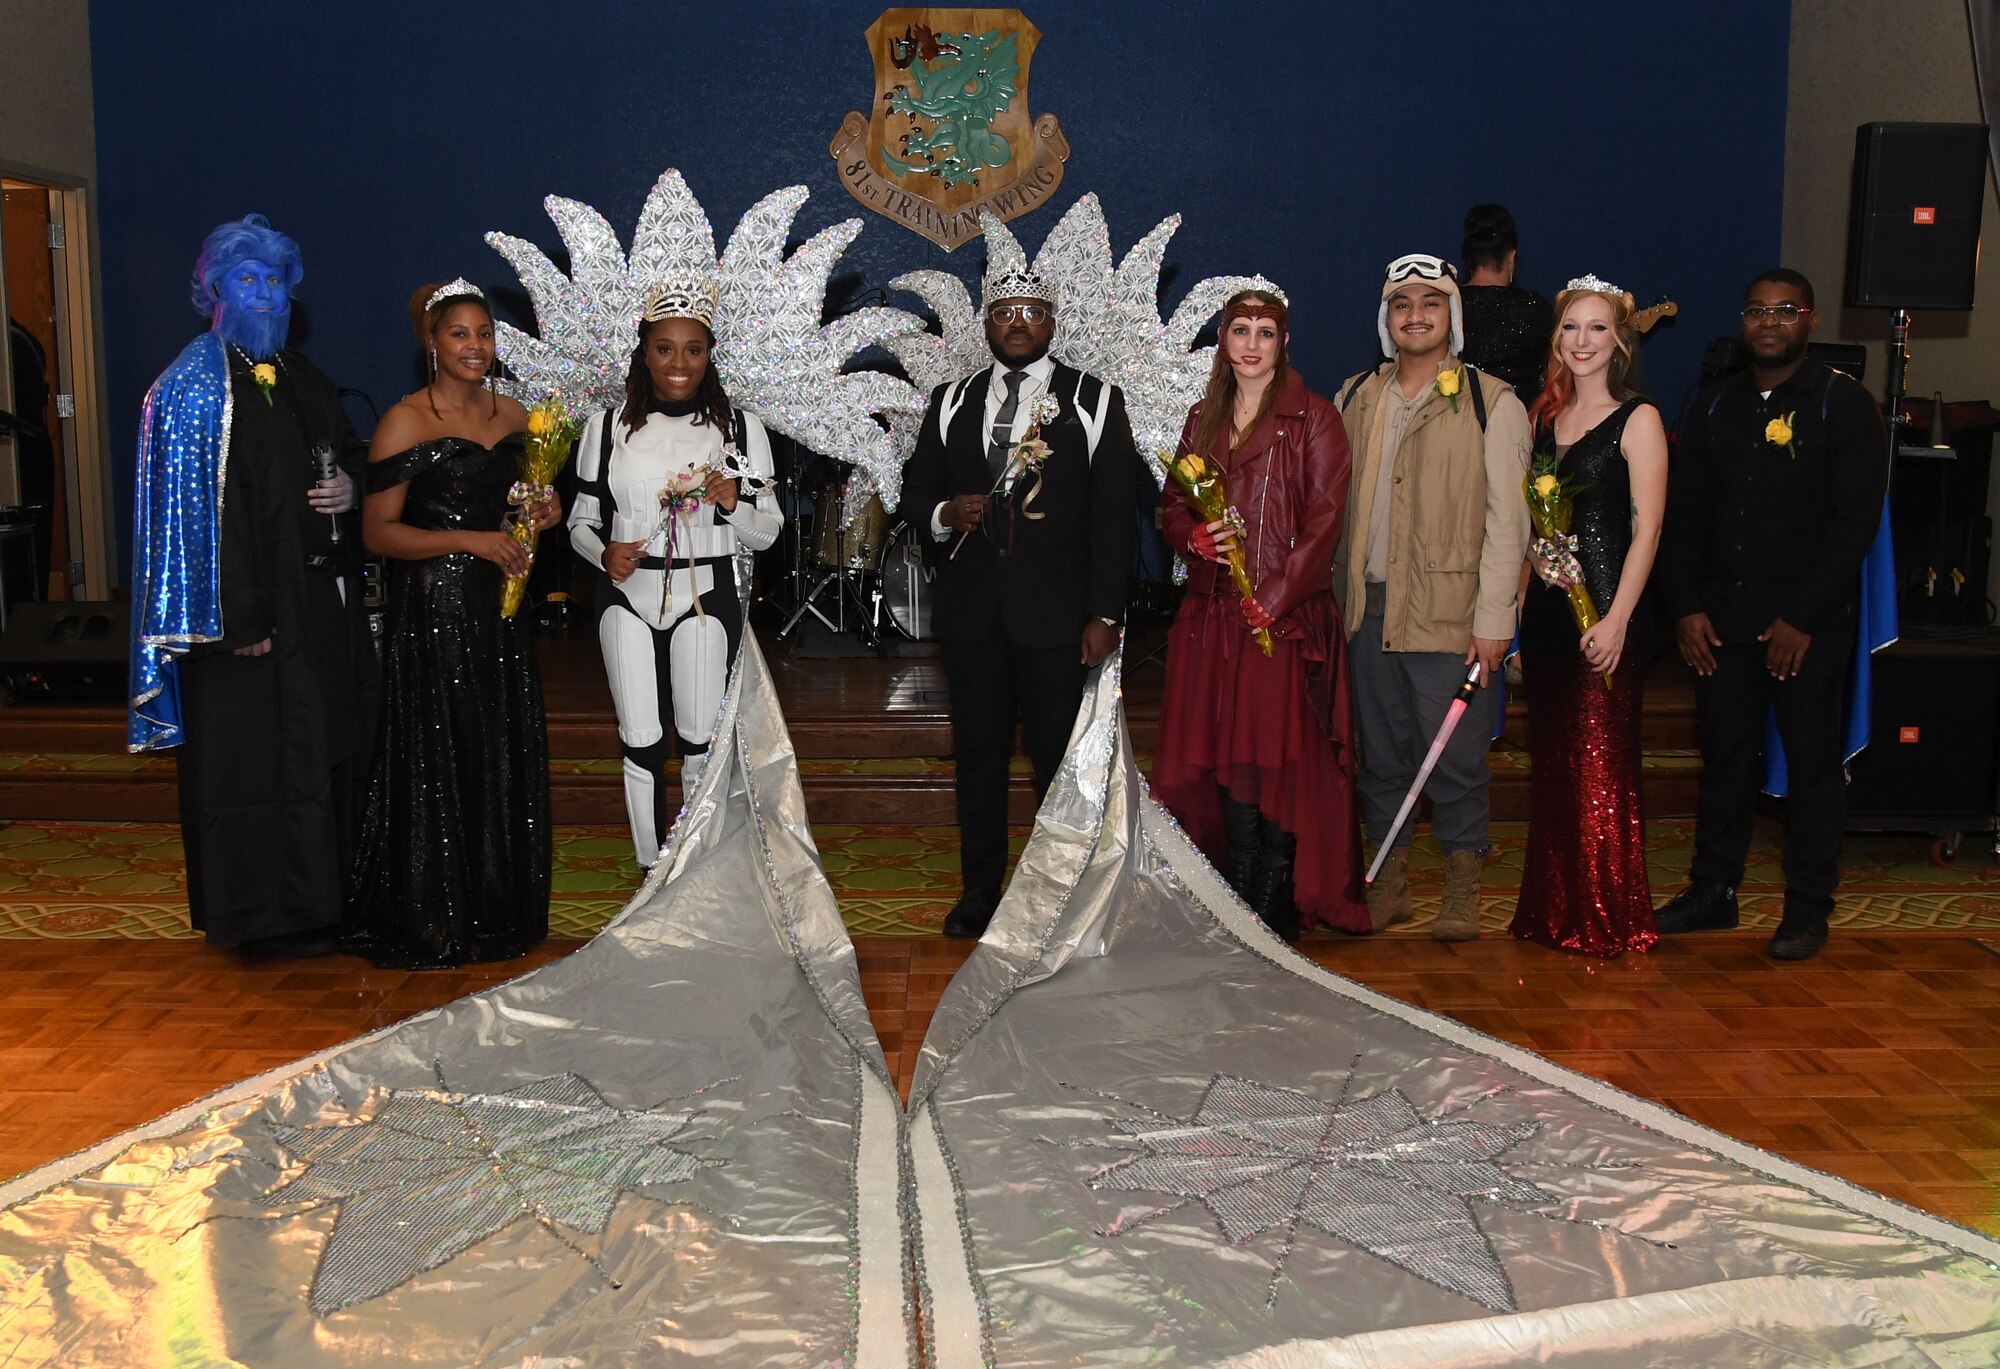 The 2023 Krewe of Medics Royalty Court pose for a photo during the 32nd Annual Krewe of Medics Mardi Gras Ball at the Bay Breeze Event Center on Keesler Air Force Base, Mississippi, Feb. 11, 2023.